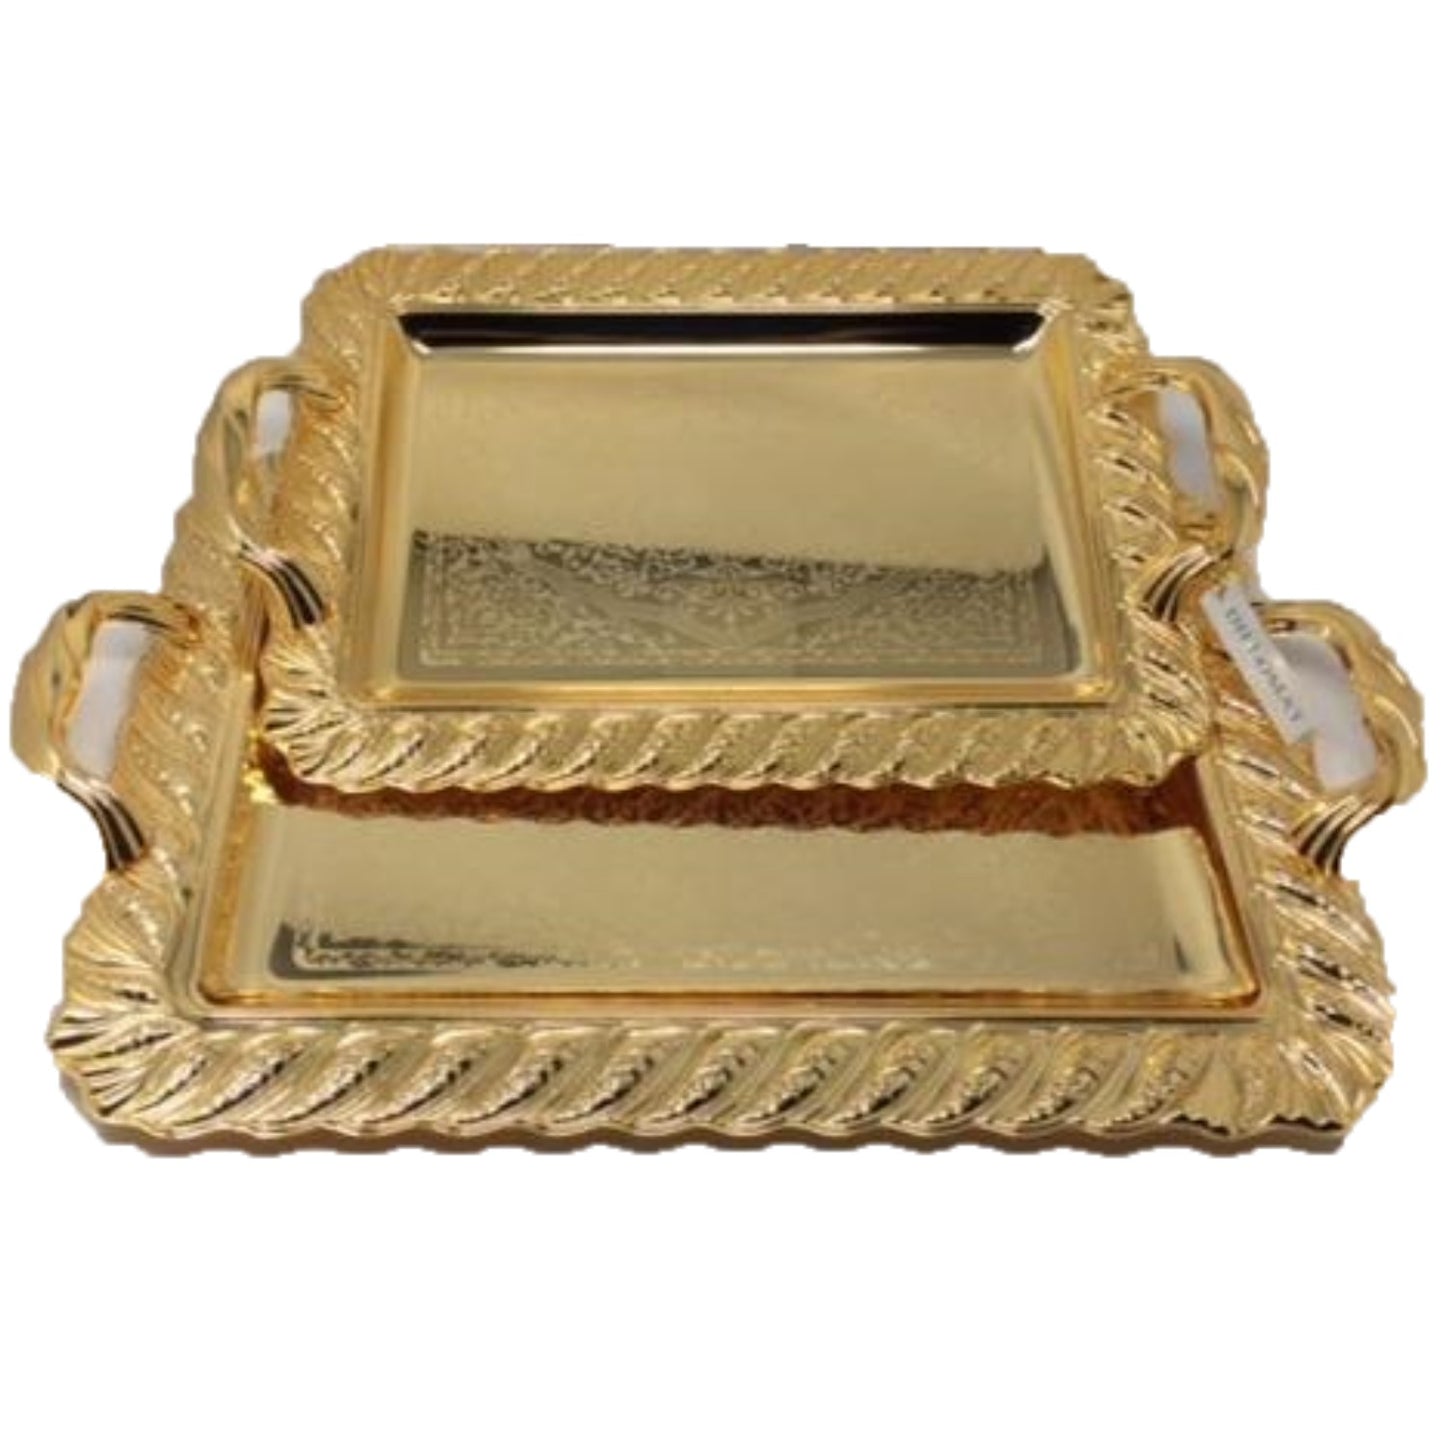 2 PC Luxurious Vintage Royal Gold Serving Tray